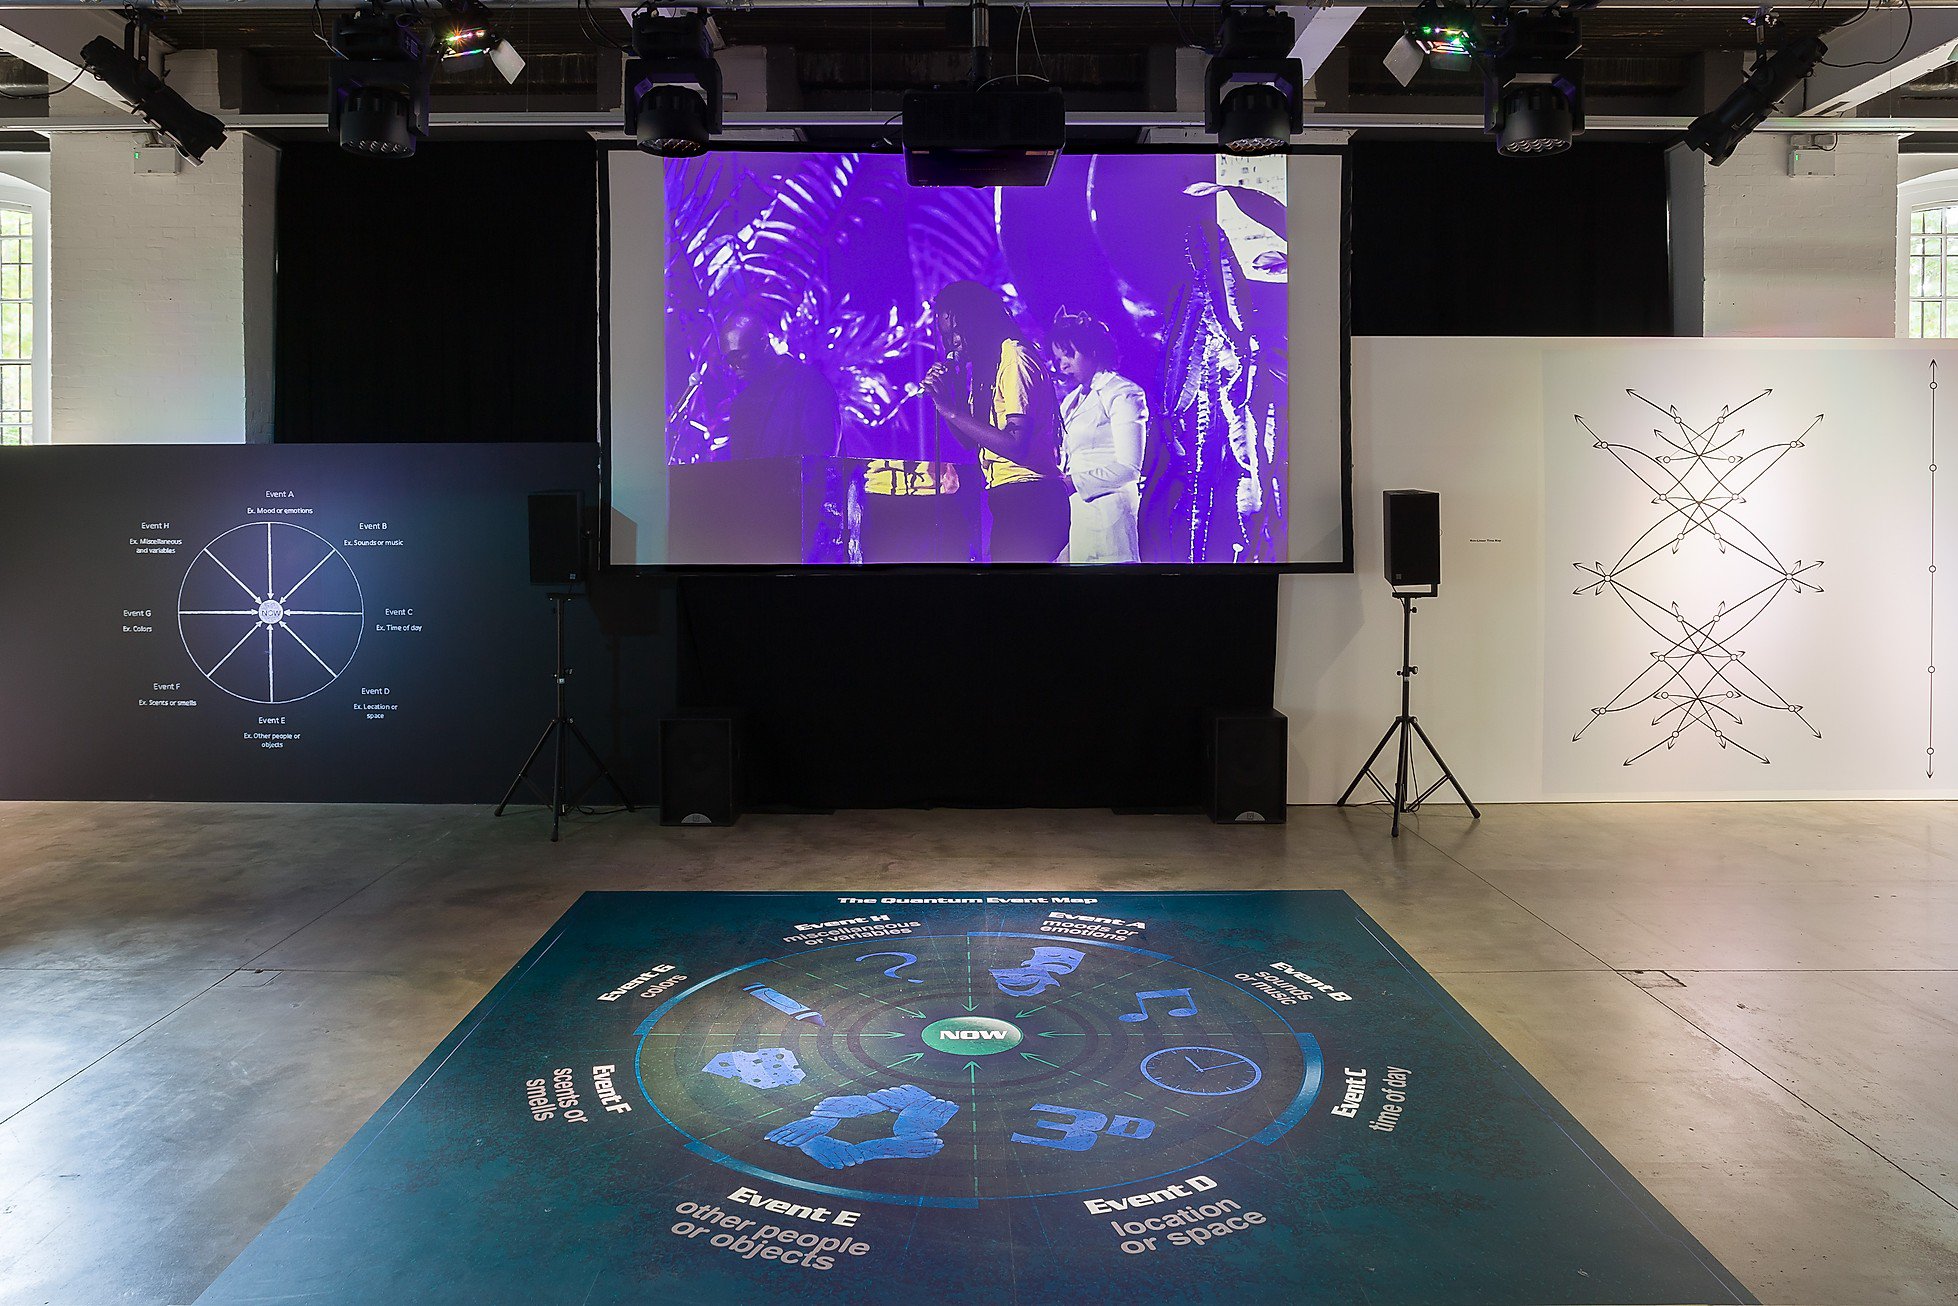 An installation of a man and a woman with microphones behind a purple background on a screen. There are speakers on the sides and a black poster to the left and white poster to the right. There is a poster of a circle diagram in the floor's center.